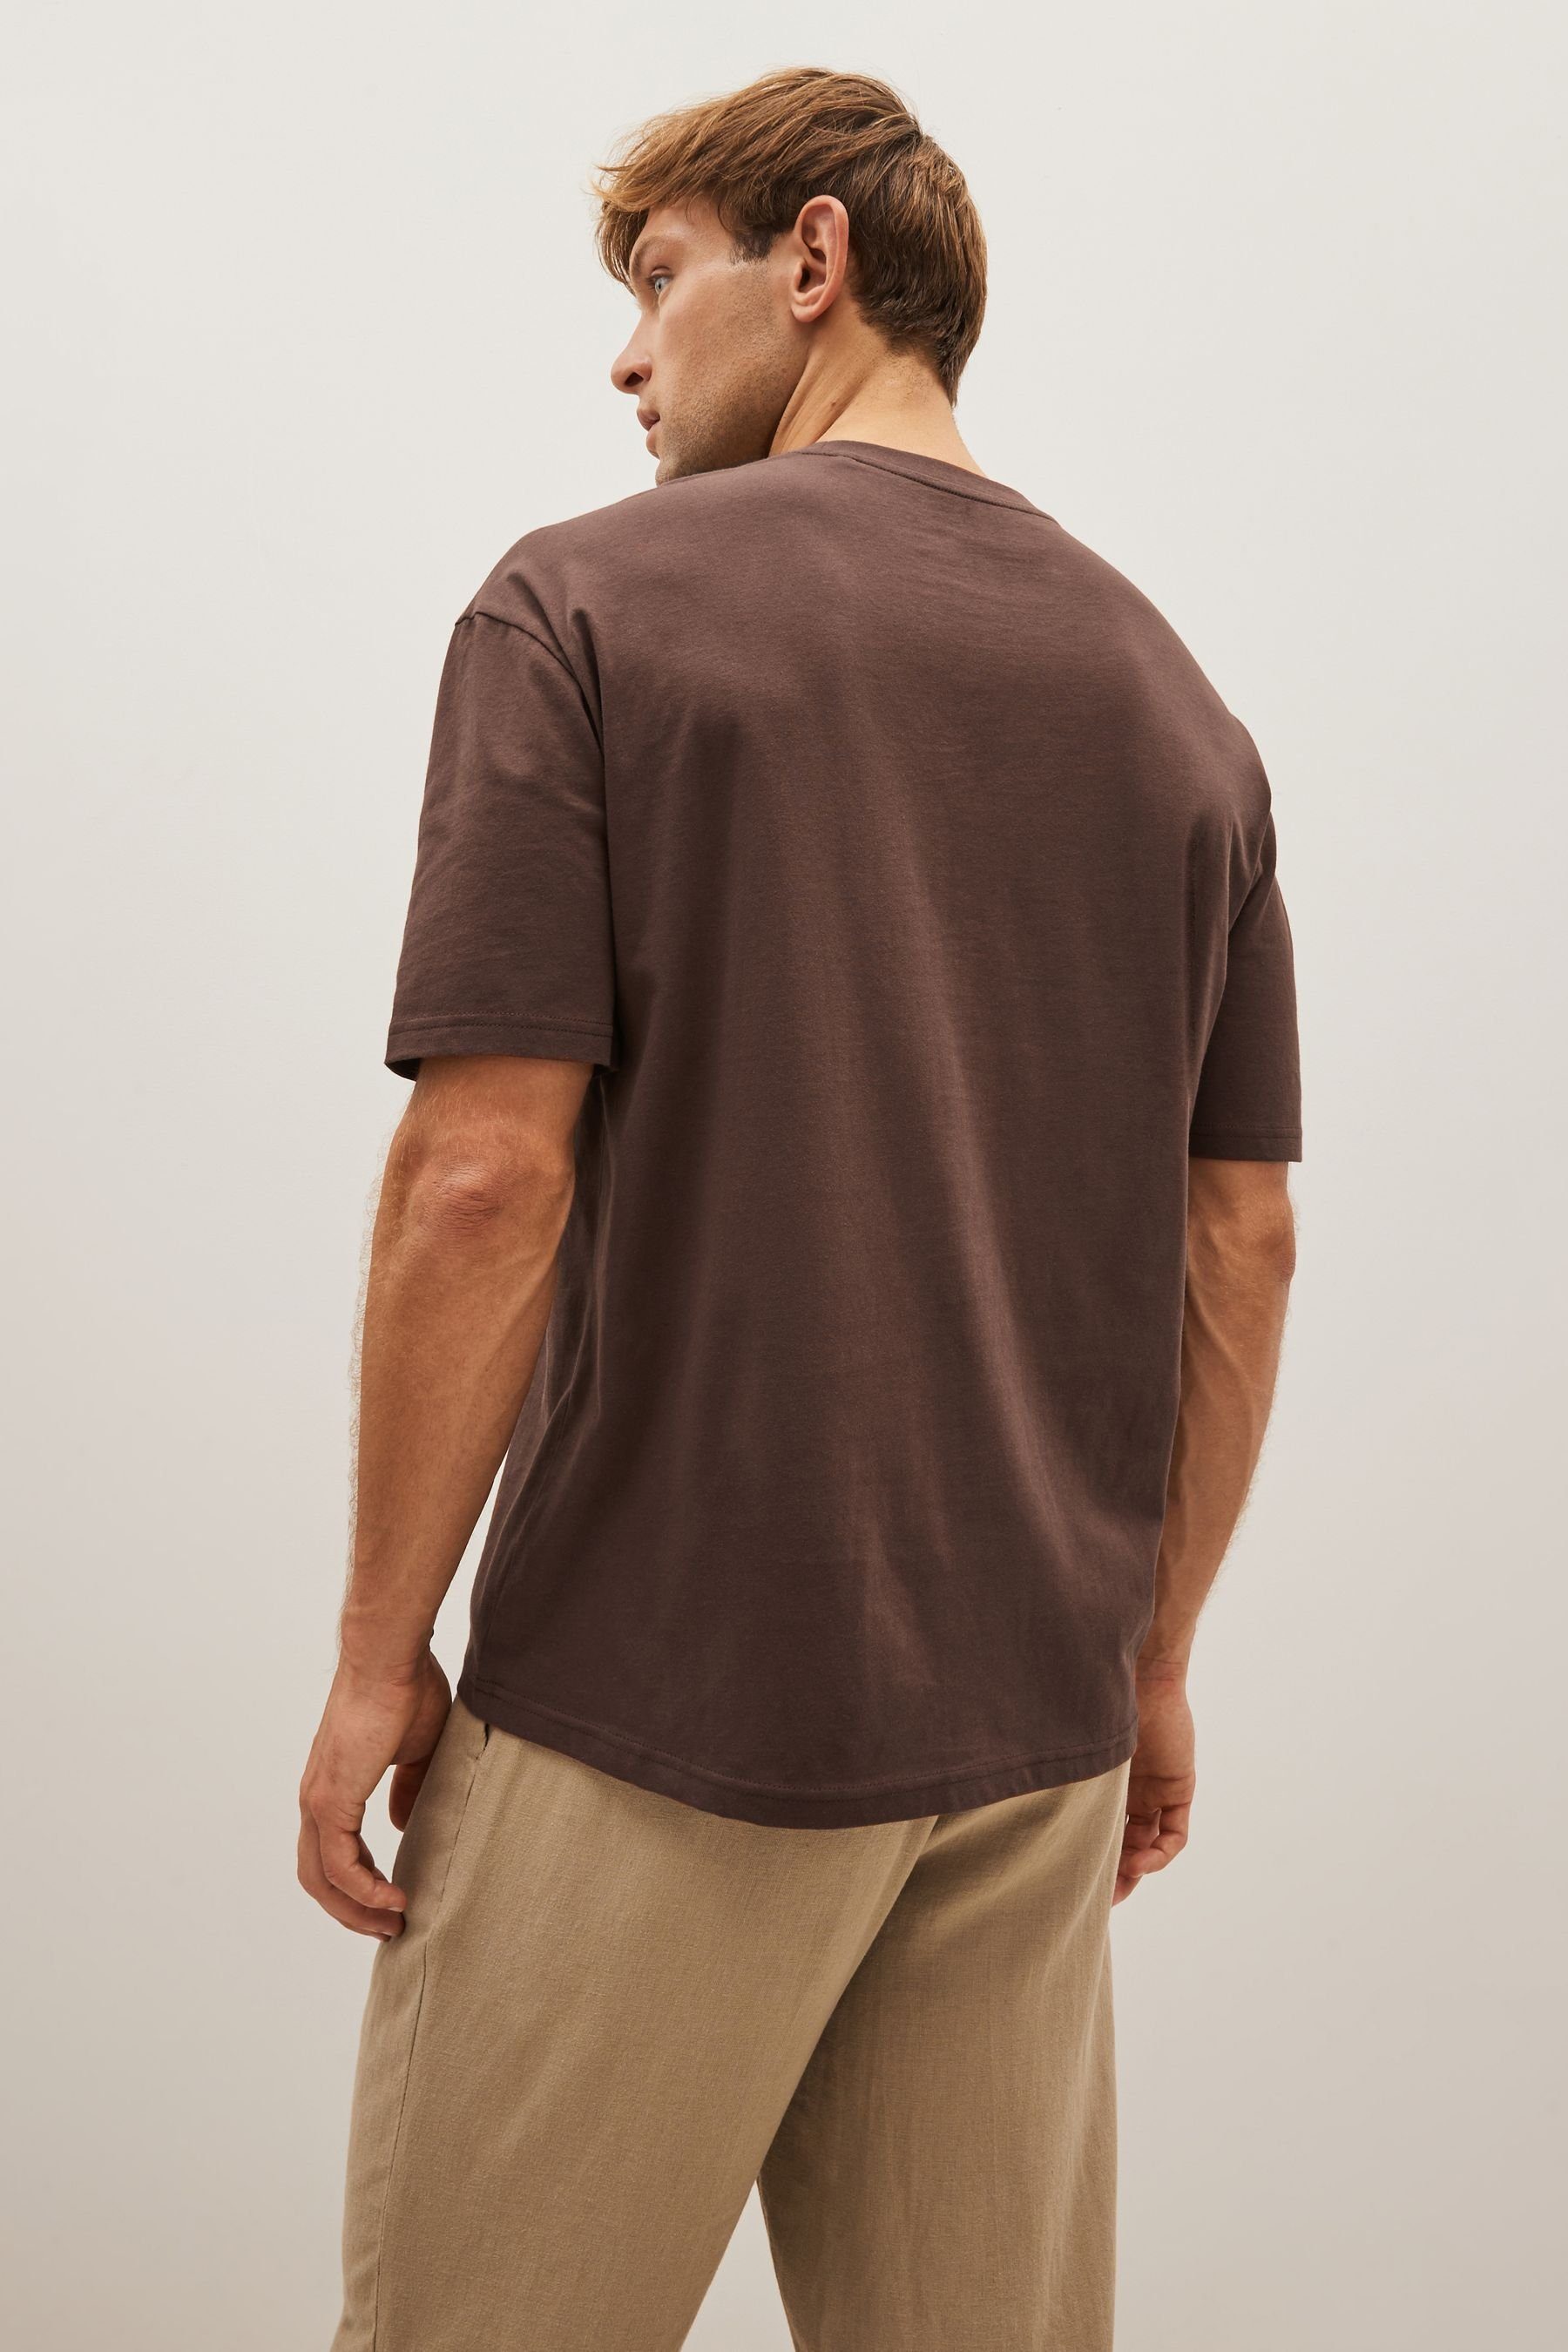 Next T-Shirt Rundhals-T-Shirt im Chocolate Fit Brown (1-tlg) Relaxed